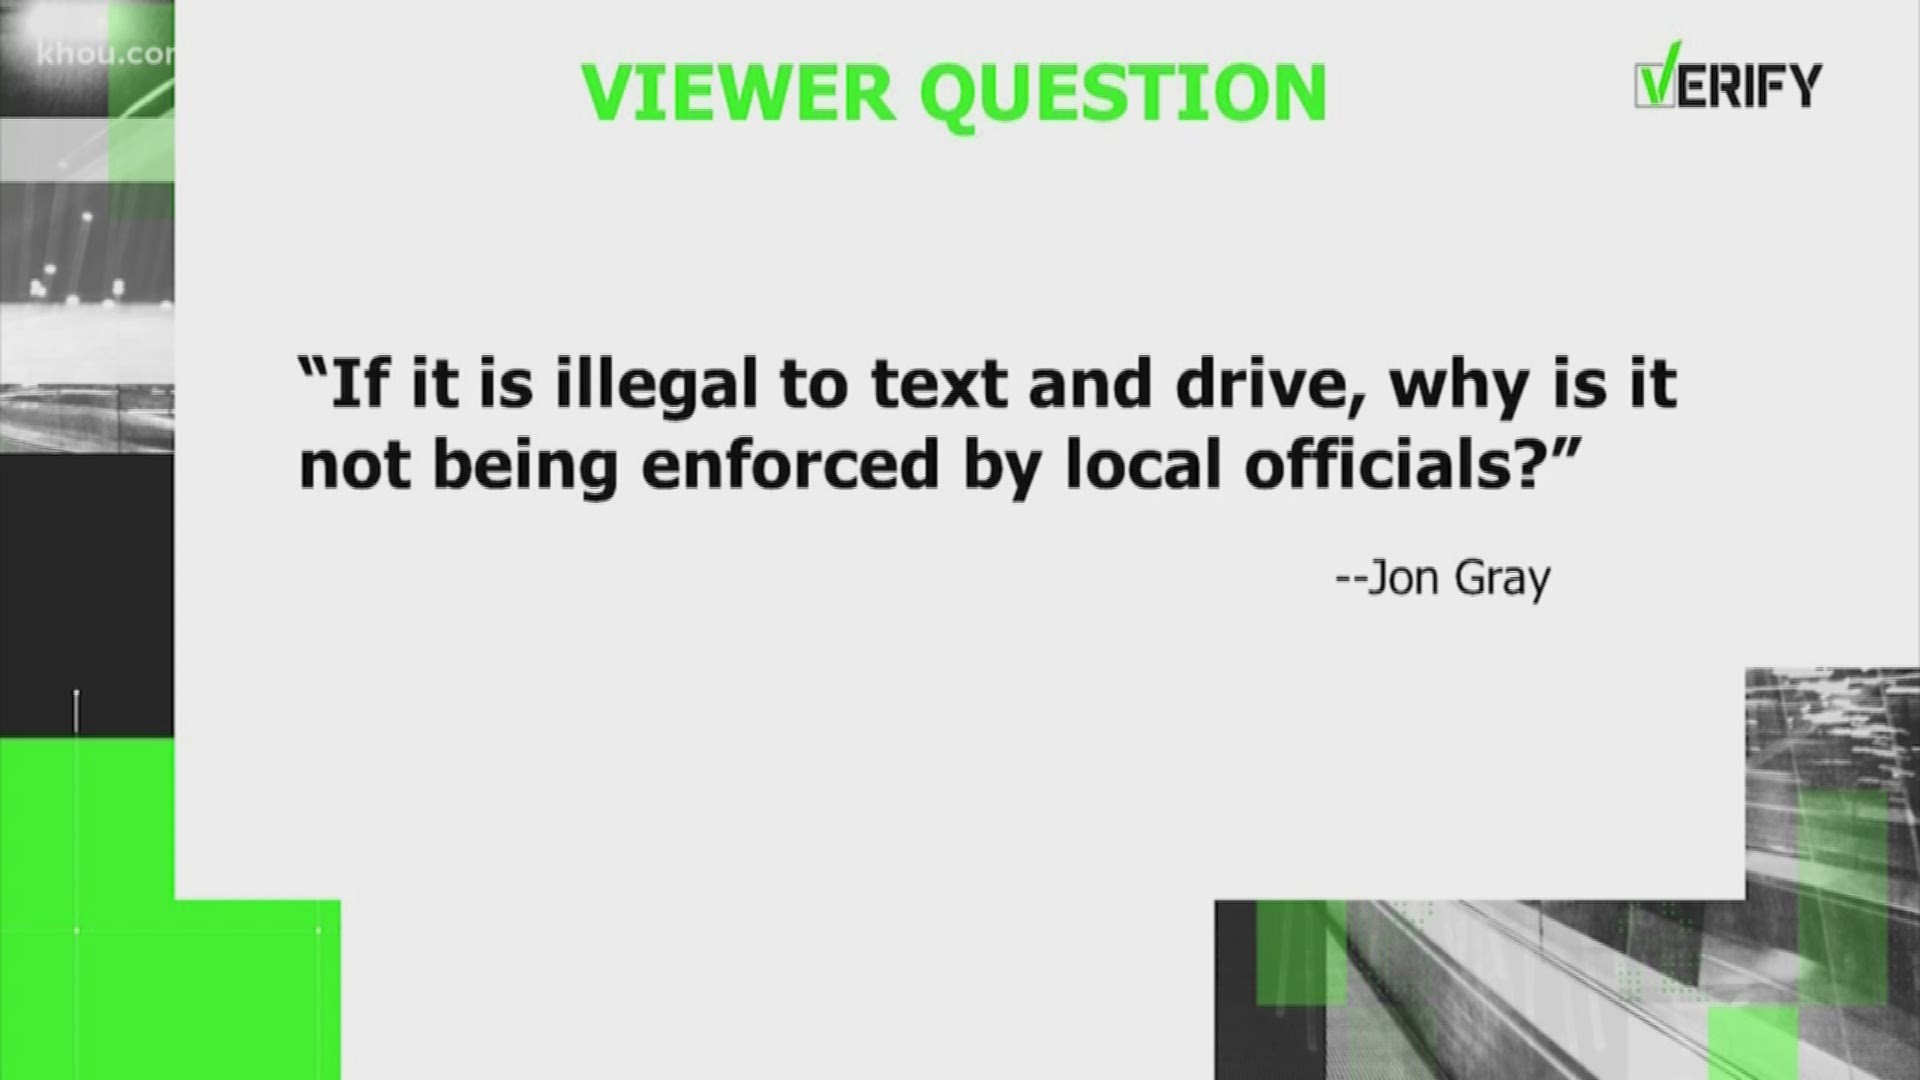 Viewer Jon Gray had questions about the law and reached out to our Verify team. He asked if it is illegal, why is it not being enforced by local officials?